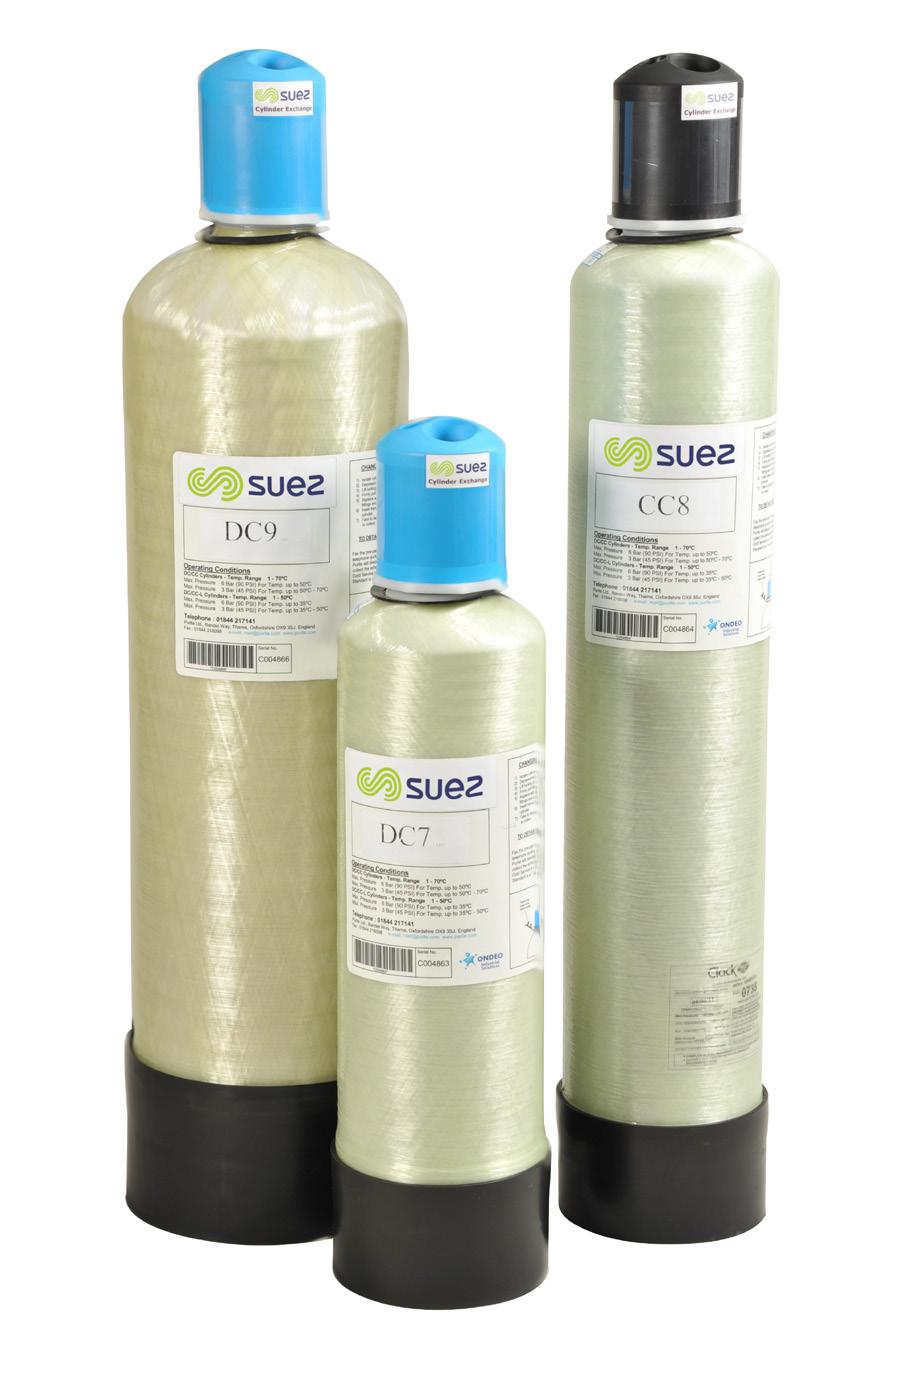 The exchange cylinder concept If you require purified water with low expenditure, then the SUEZ Cylinder Exchange Service is for you.